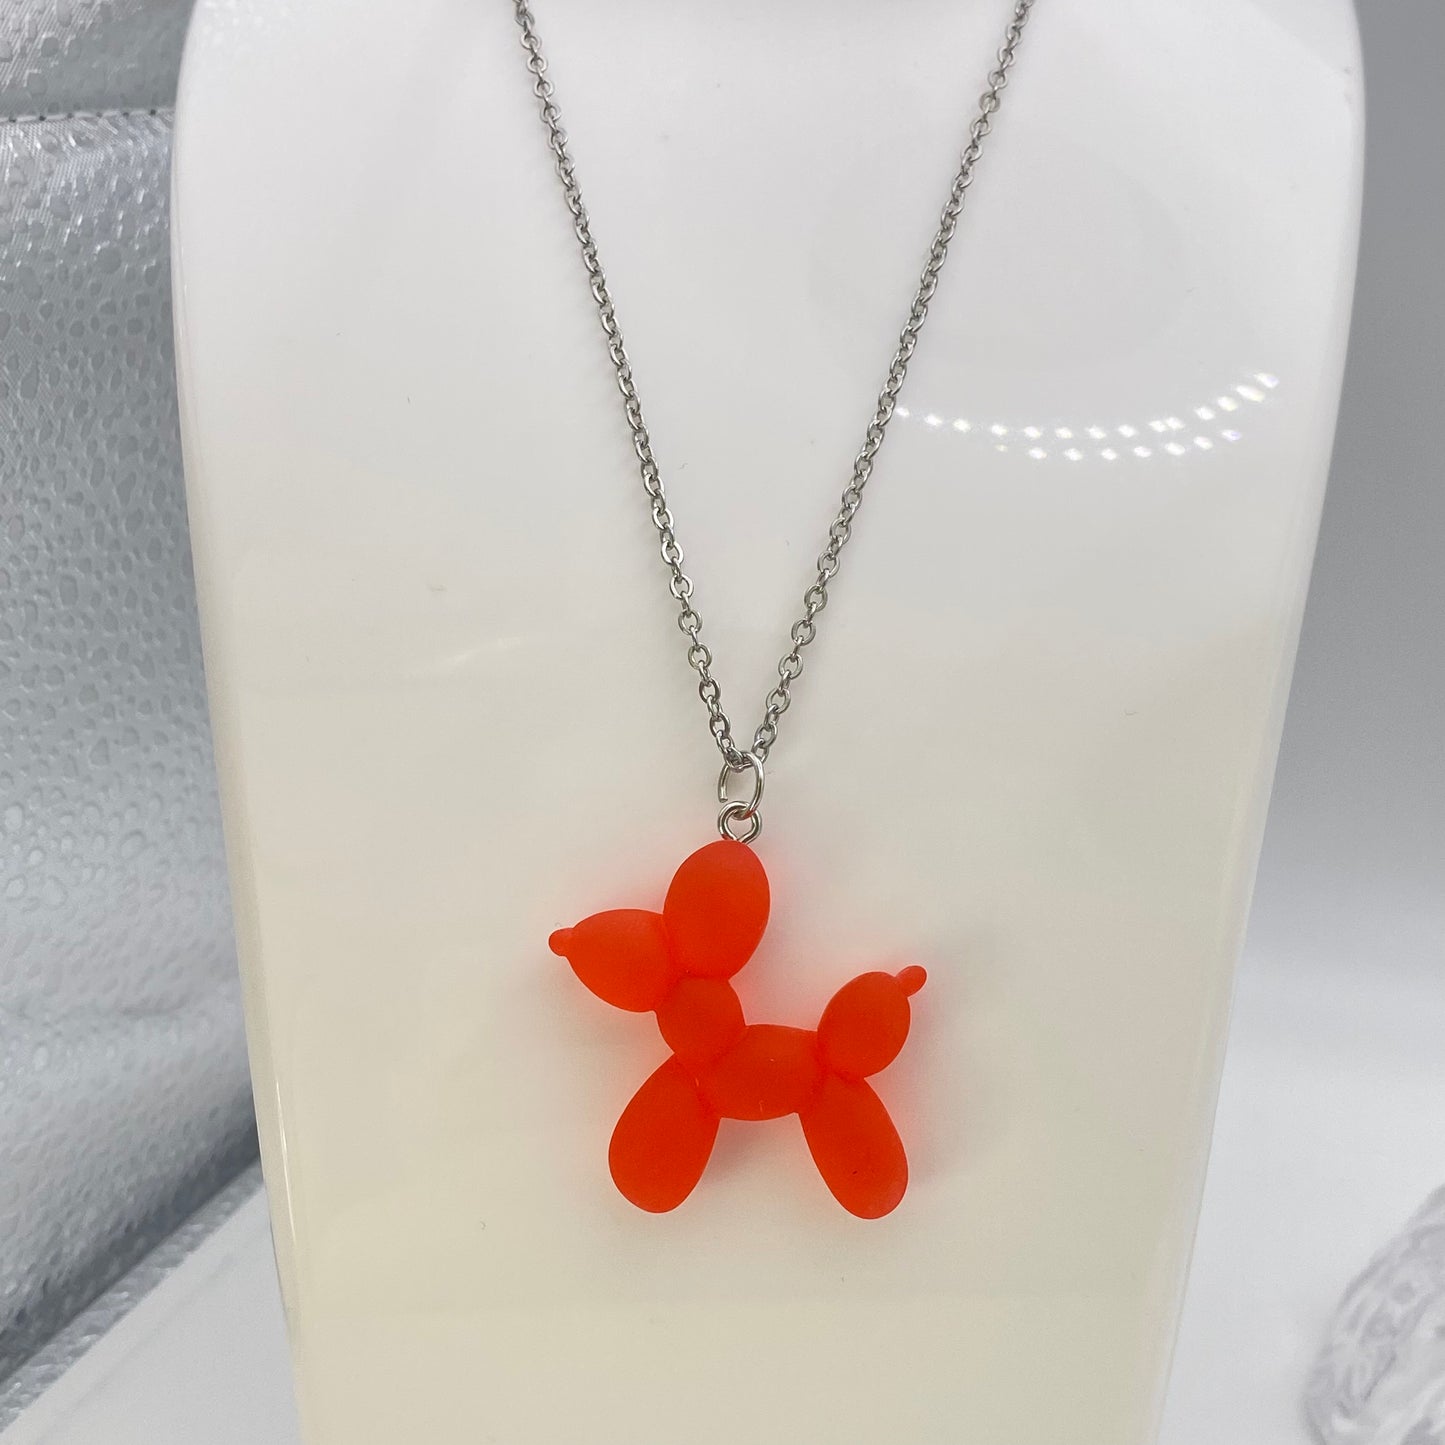 Red Balloon Animal Dog Necklace